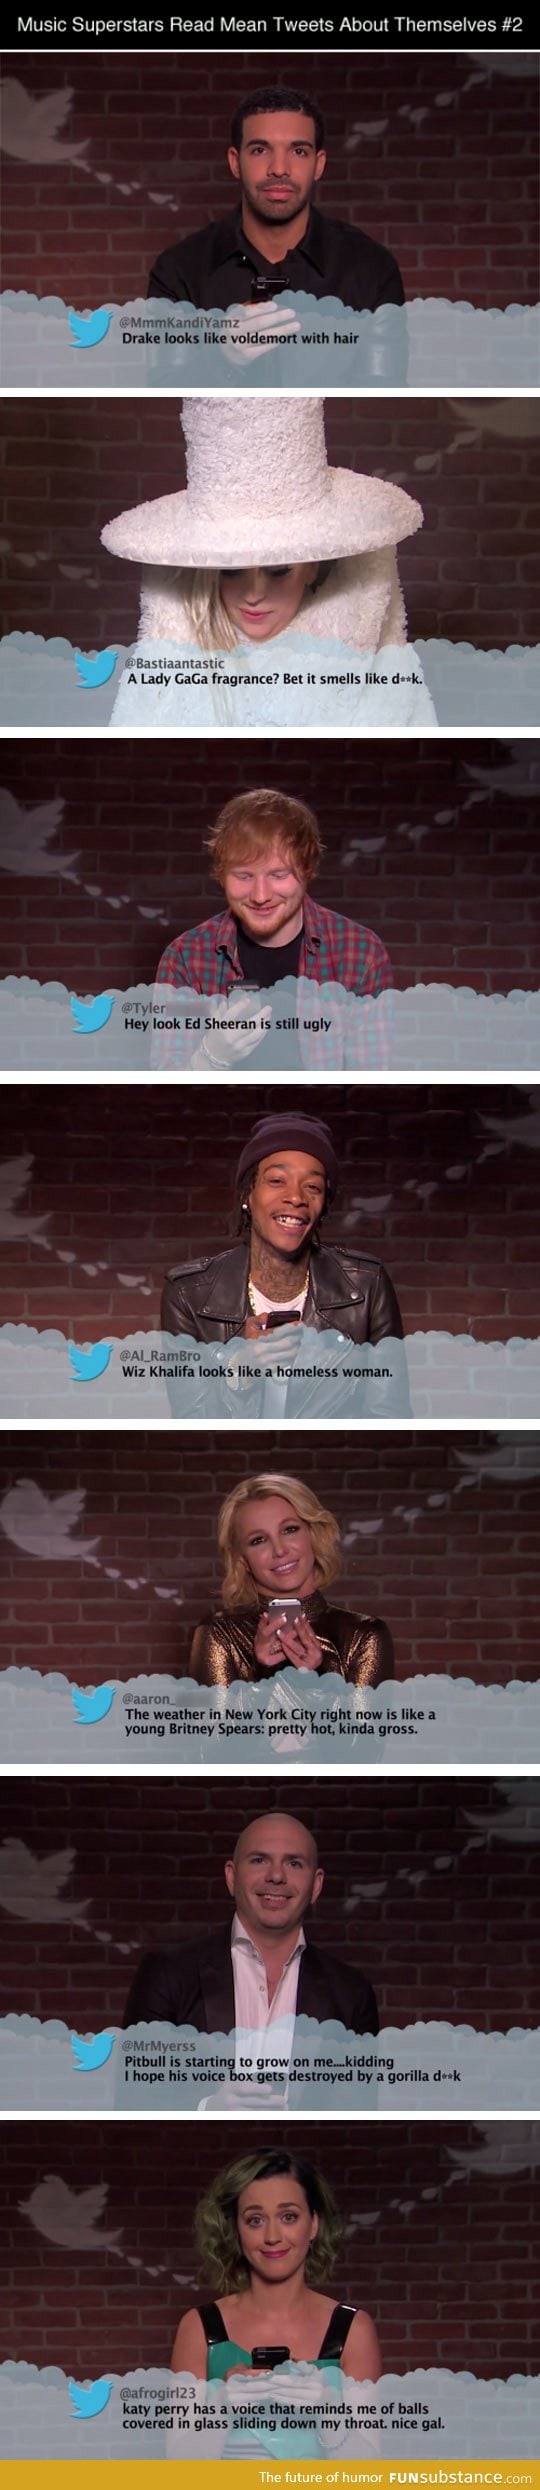 Celebrities read mean tweets about themselves